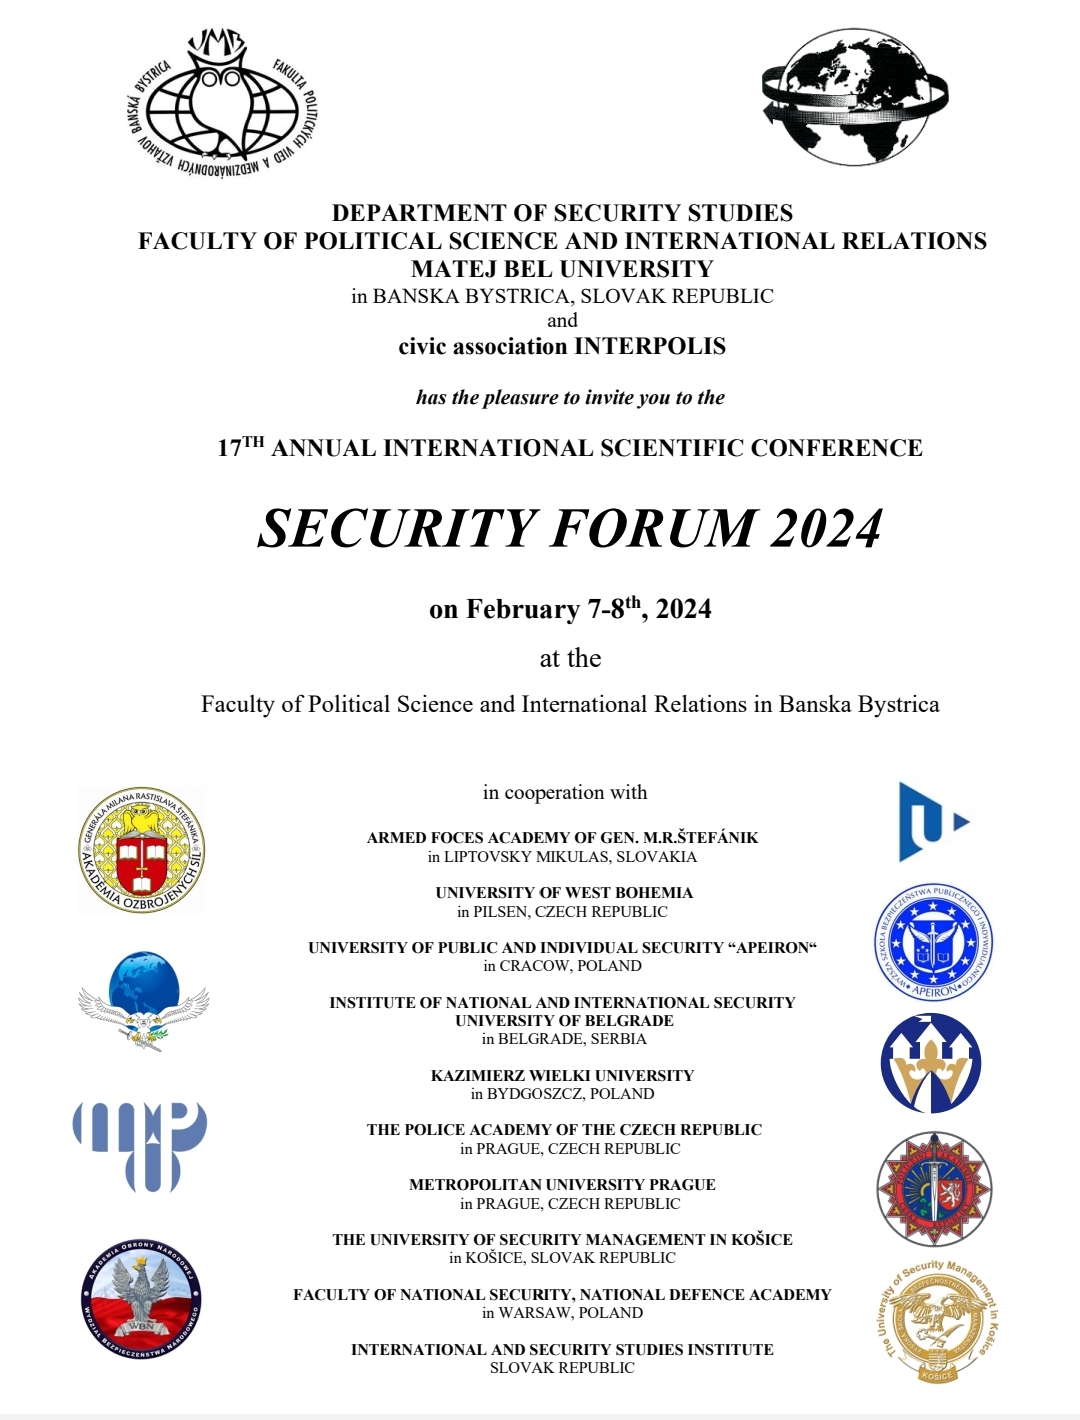 The Institute for National and International Security INIS is again this year the co-organizer of the 17th ANNUAL INTERNATIONAL SCIENTIFIC CONFERENCE-SECURITY FORUM 2024